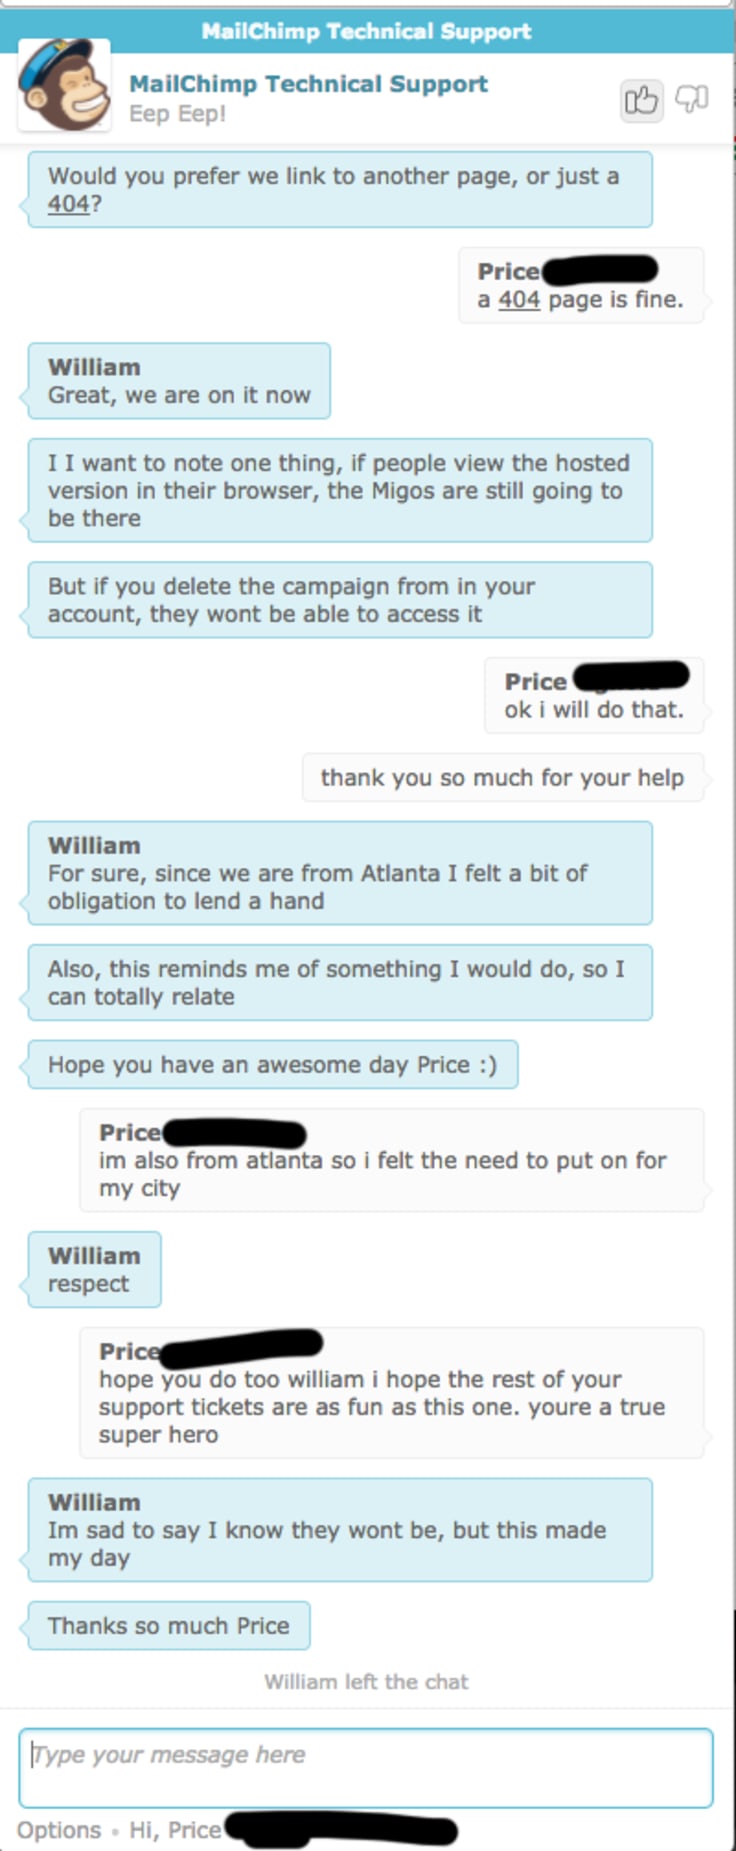 Mailchimp technical support chat window